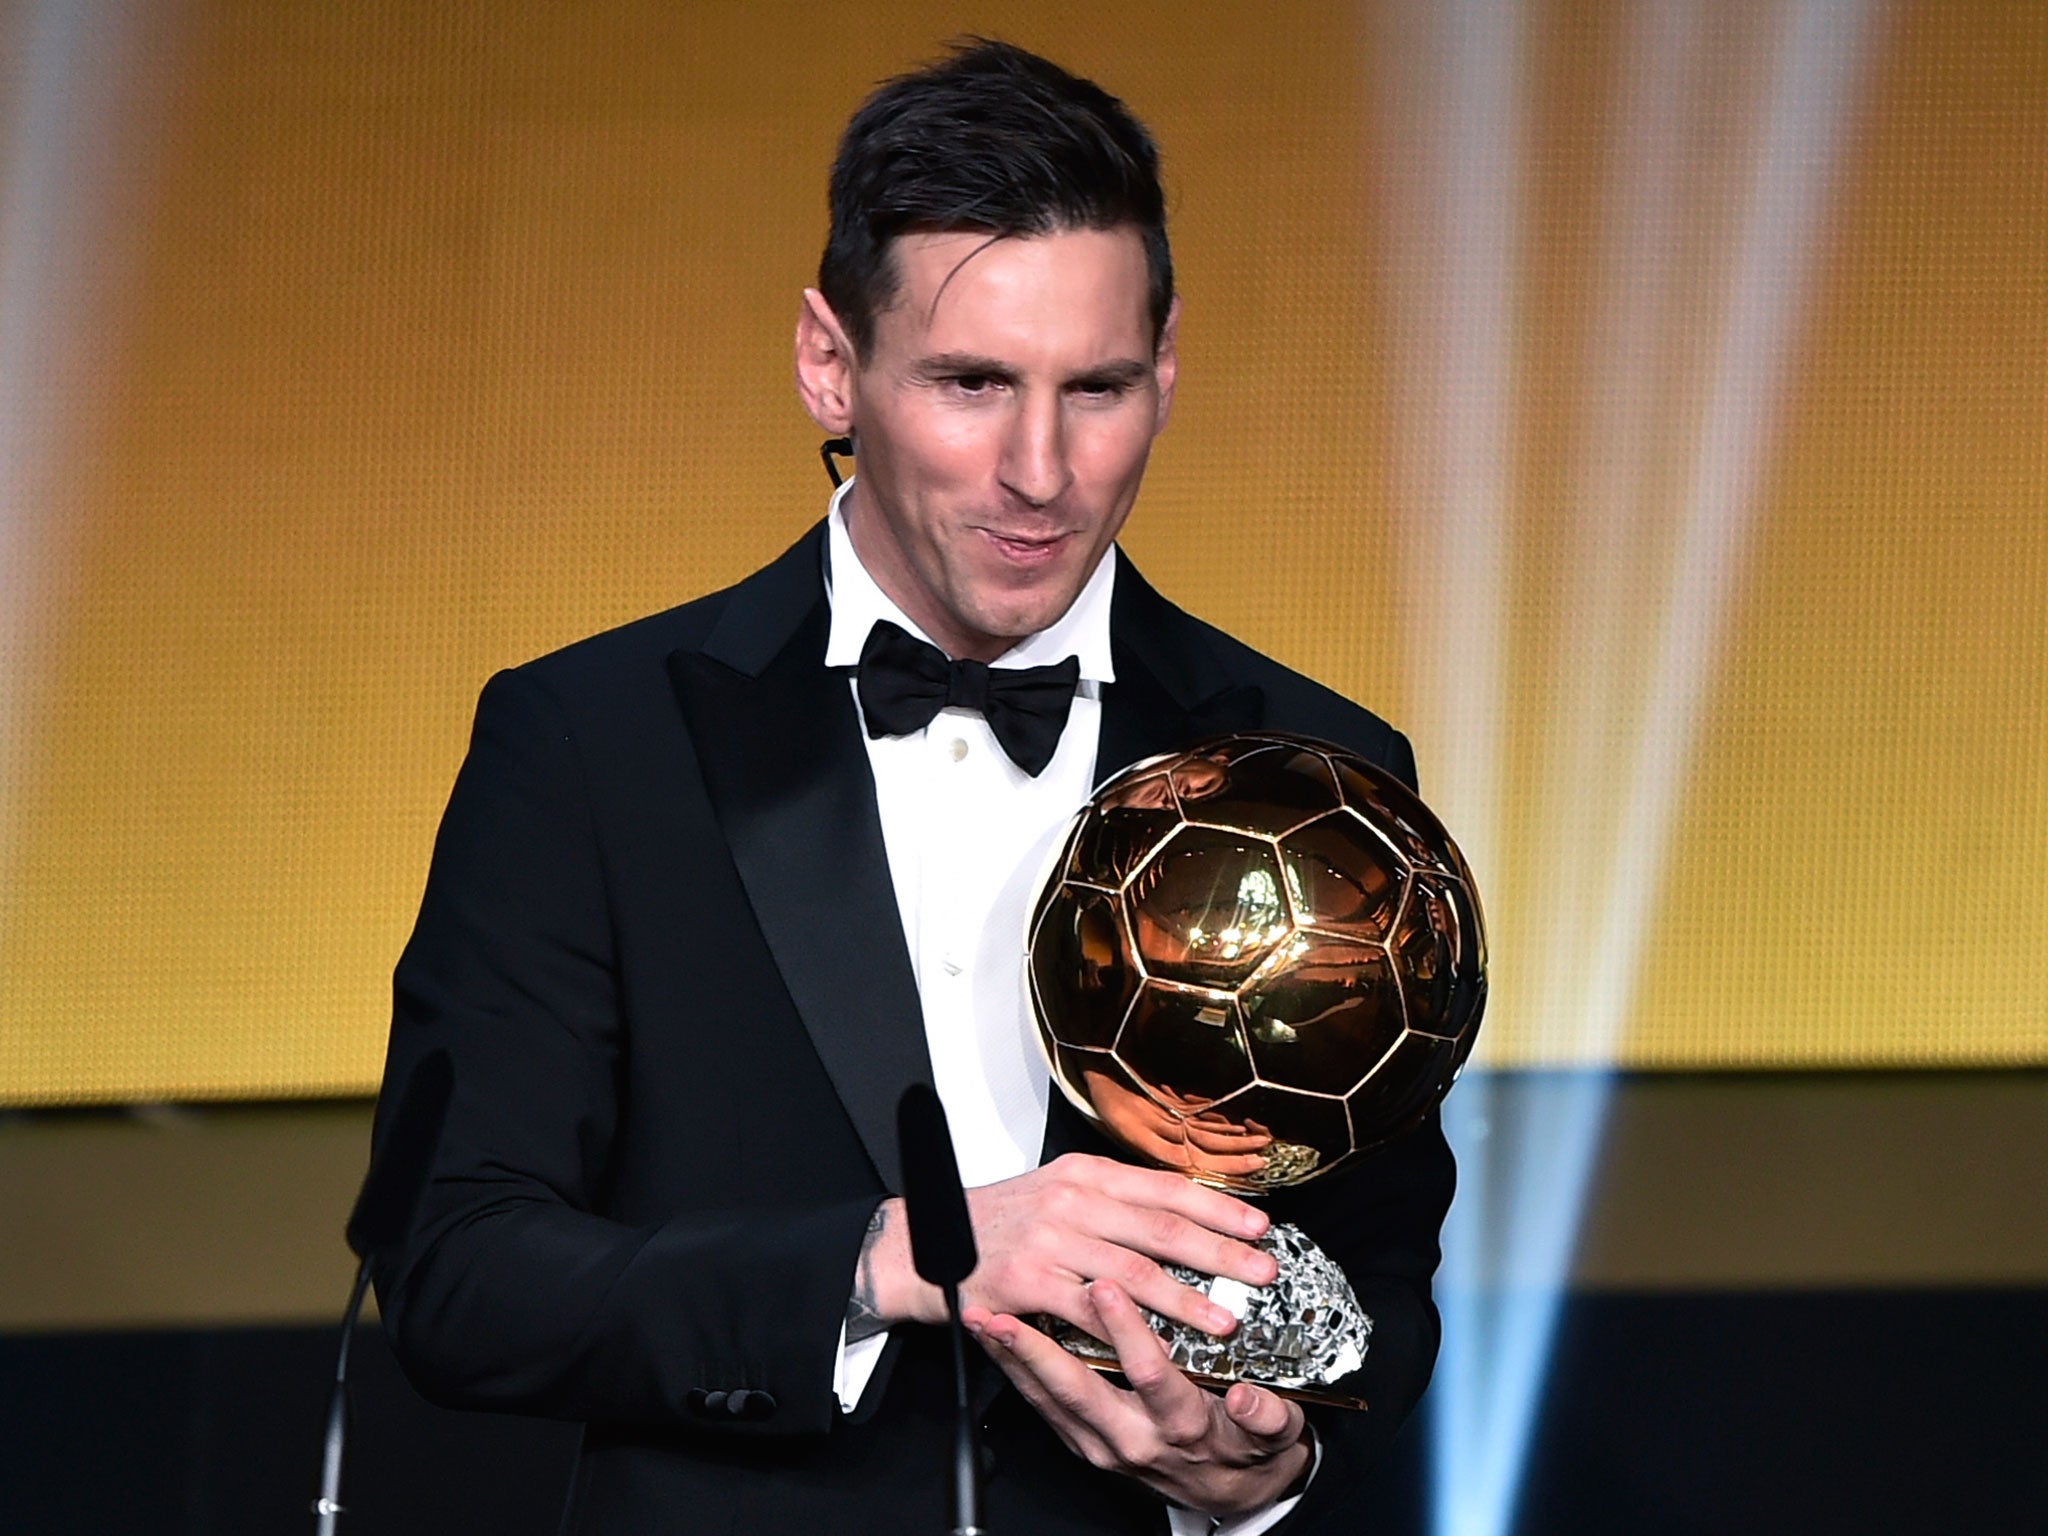 Lionel Messi picking up his fifth Ballon d'Or trophy this week